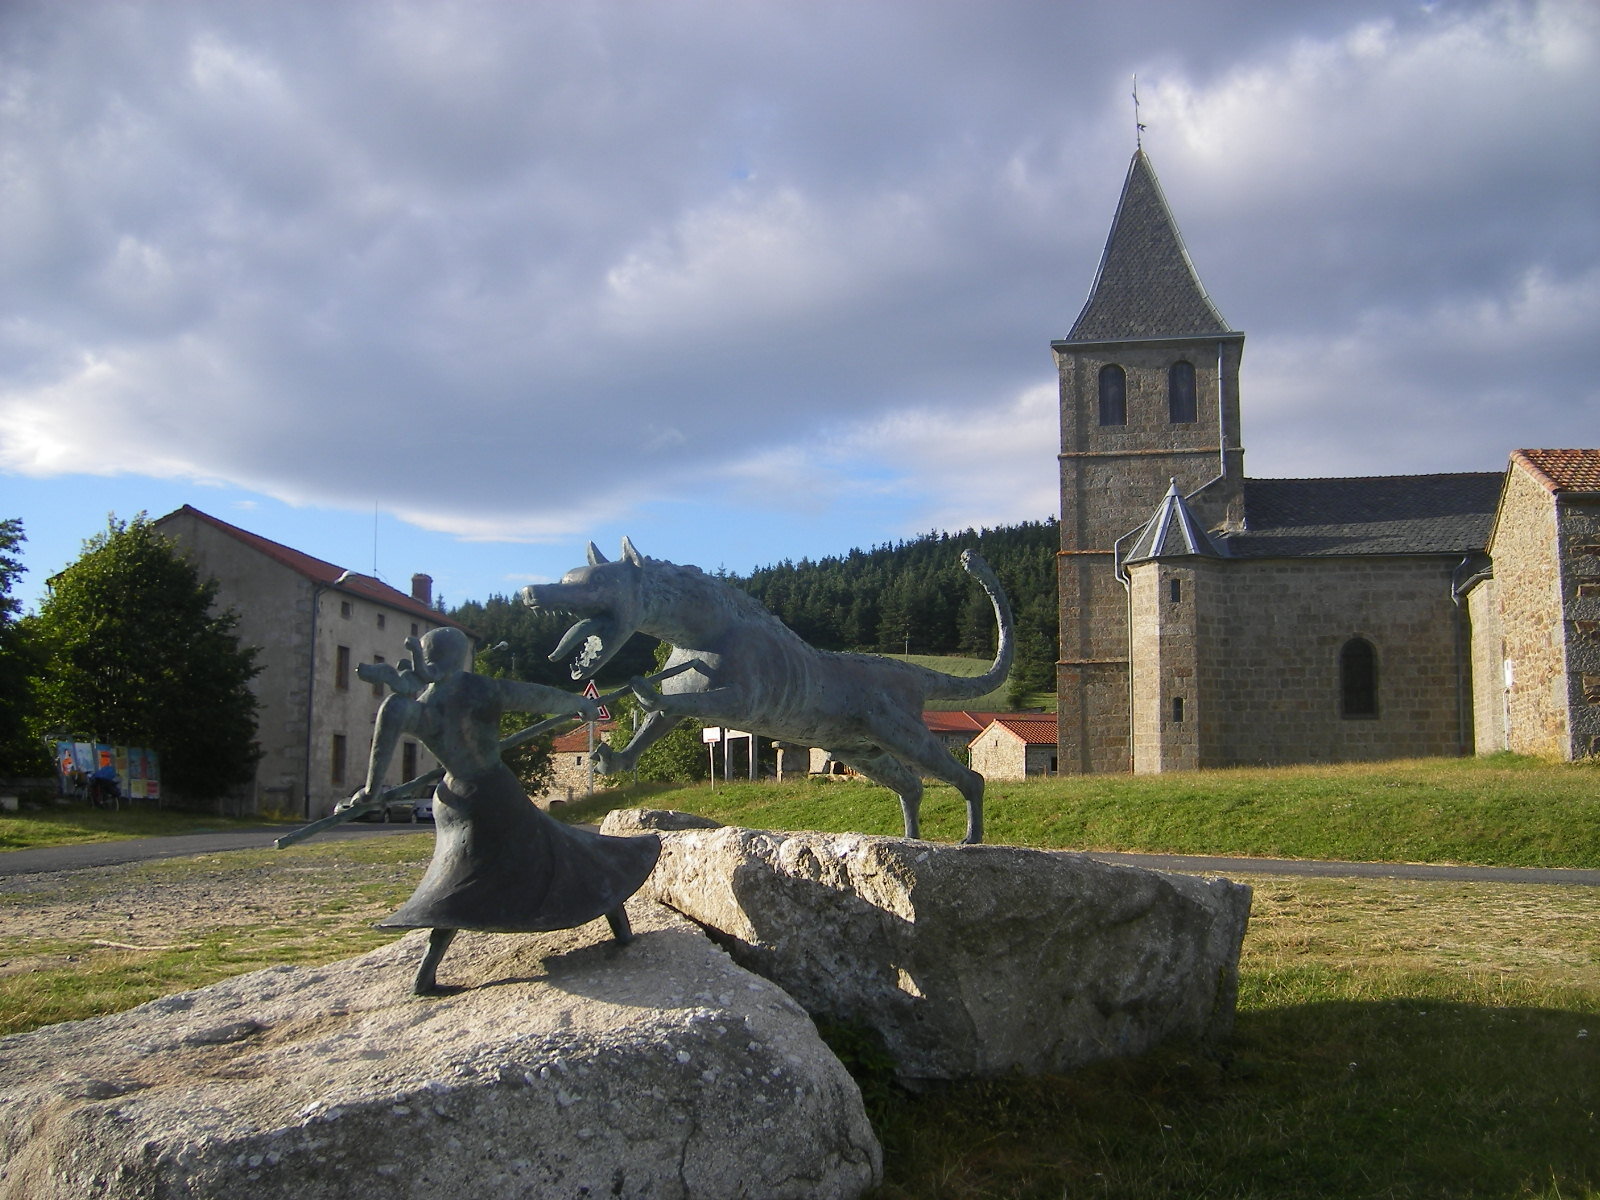  The battle of Marie-Jeanne Vallet, known as the "Maid of Gévaudan", against the beast. Sculpture by Philippe Kaeppelin, Auvers (Haute-Loire). Auvers, left: catholic church, right: municipality, center: monument of the Gévaudan beast. Photo by Szeder